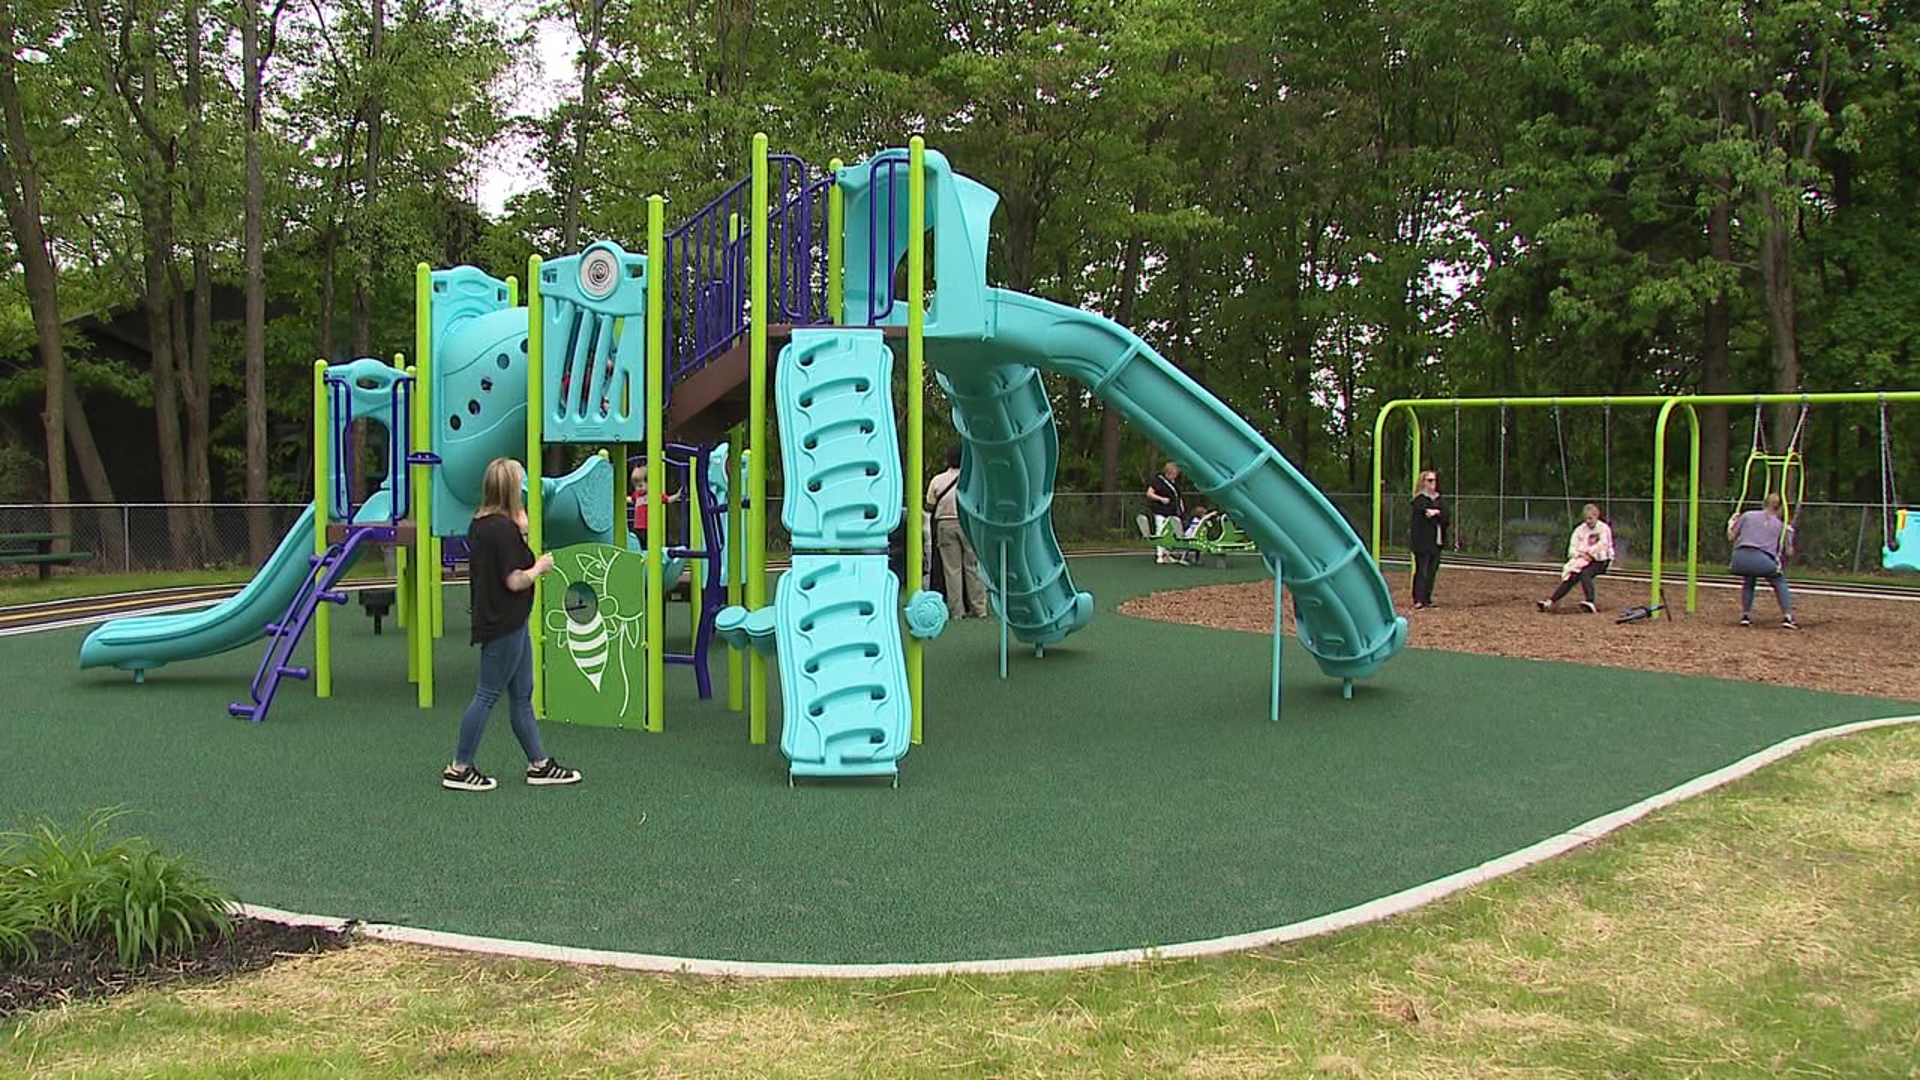 Oakmont Park near Lake Scranton is the latest park project to be completed using part of the city’s American Rescue Plan Act funds.